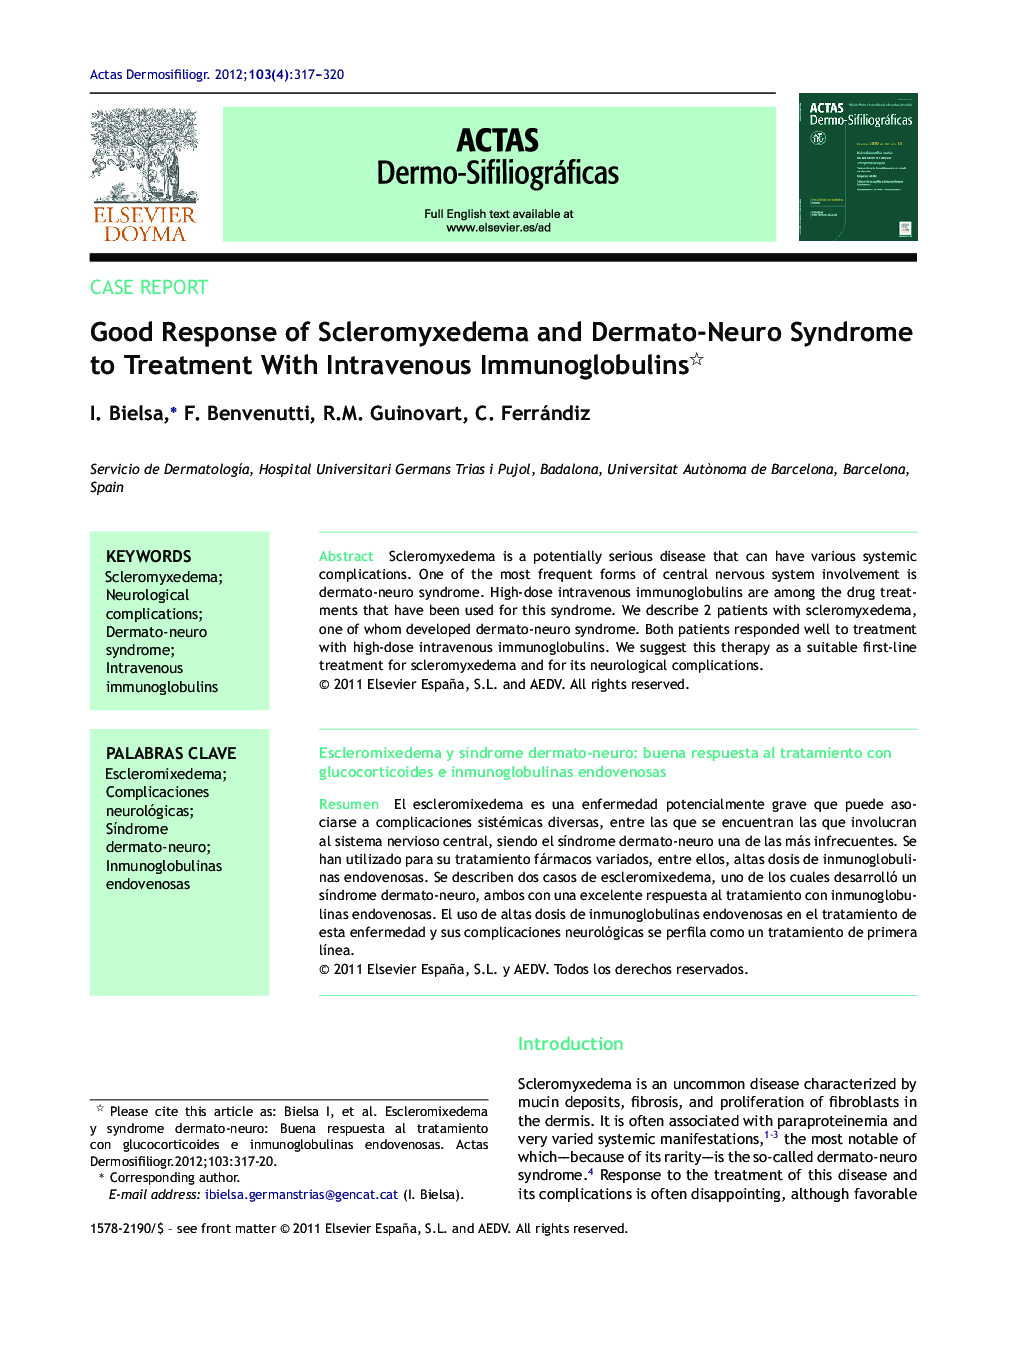 Good Response of Scleromyxedema and Dermato-Neuro Syndrome to Treatment With Intravenous Immunoglobulins